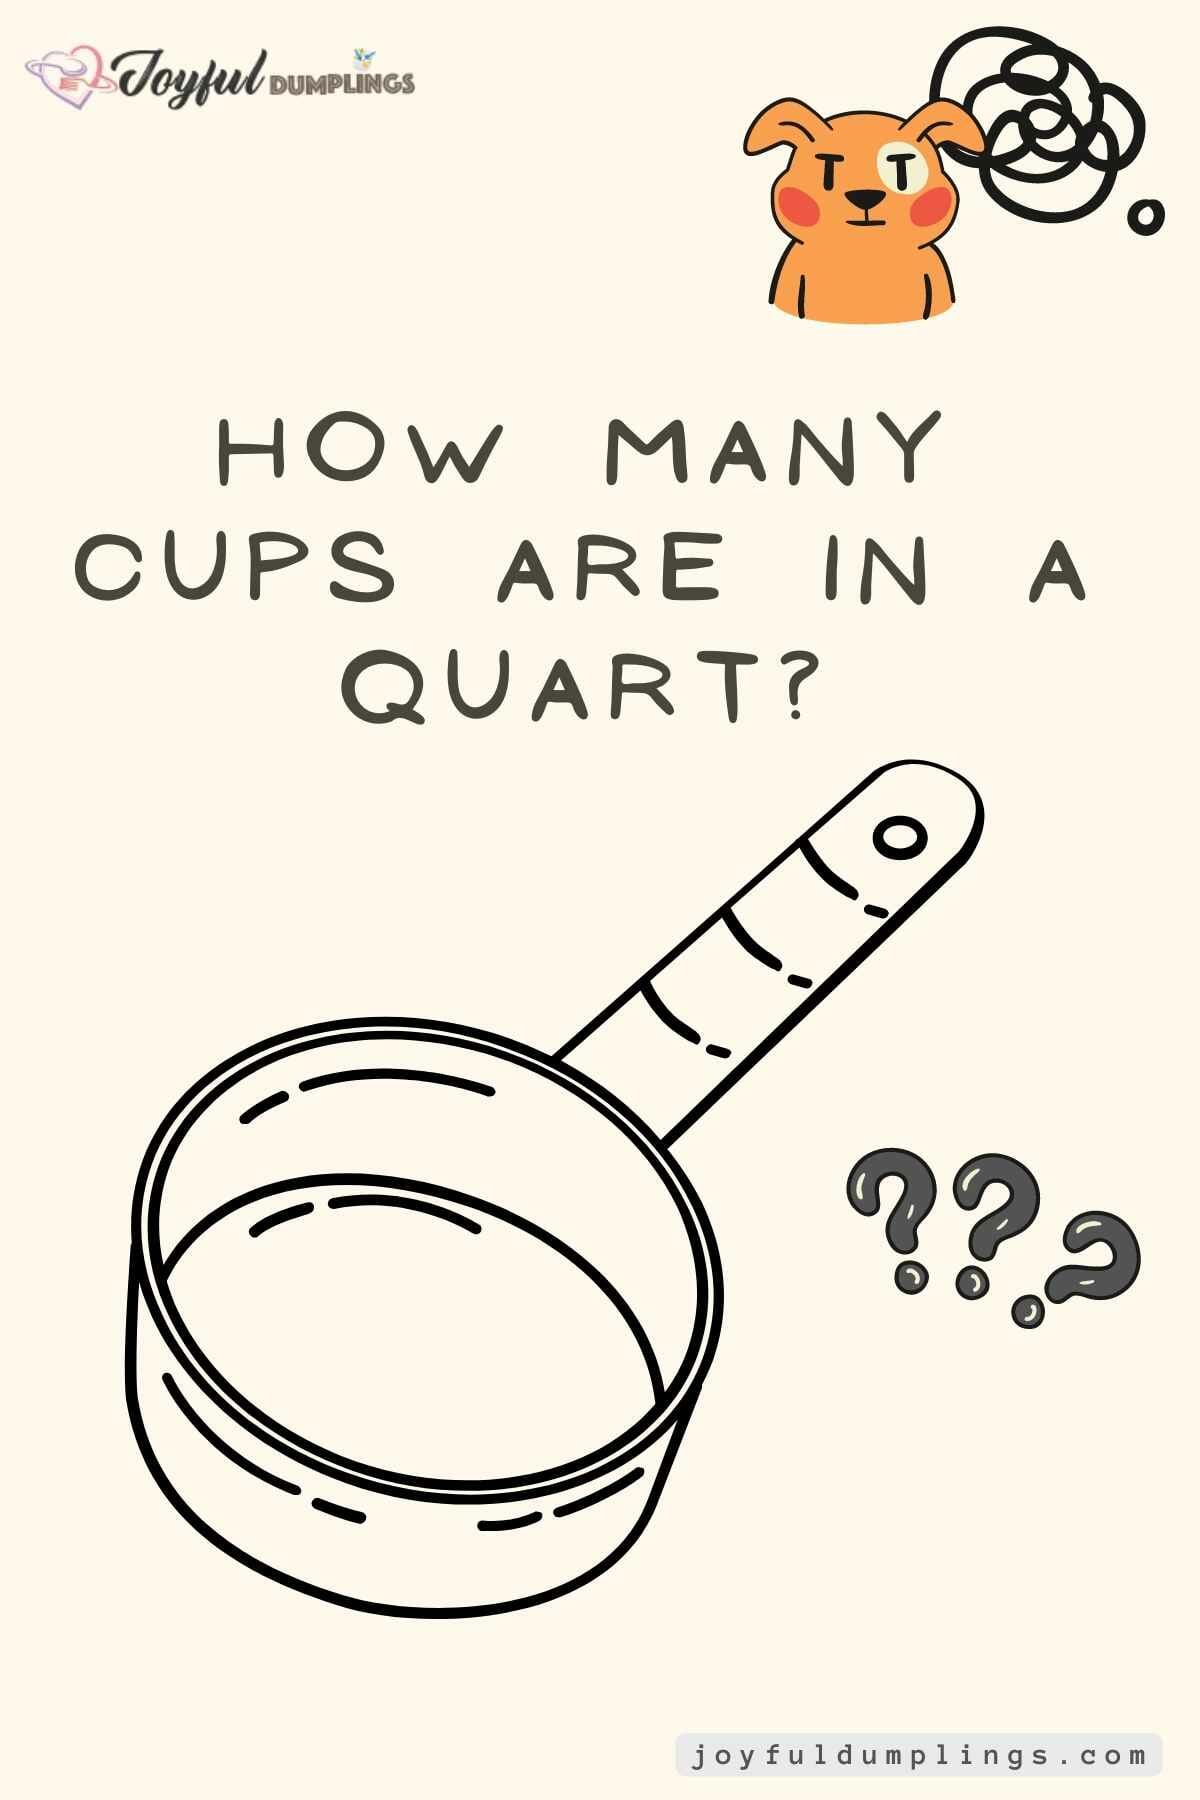 How To Measure Ingredients in Cups and Quarts?